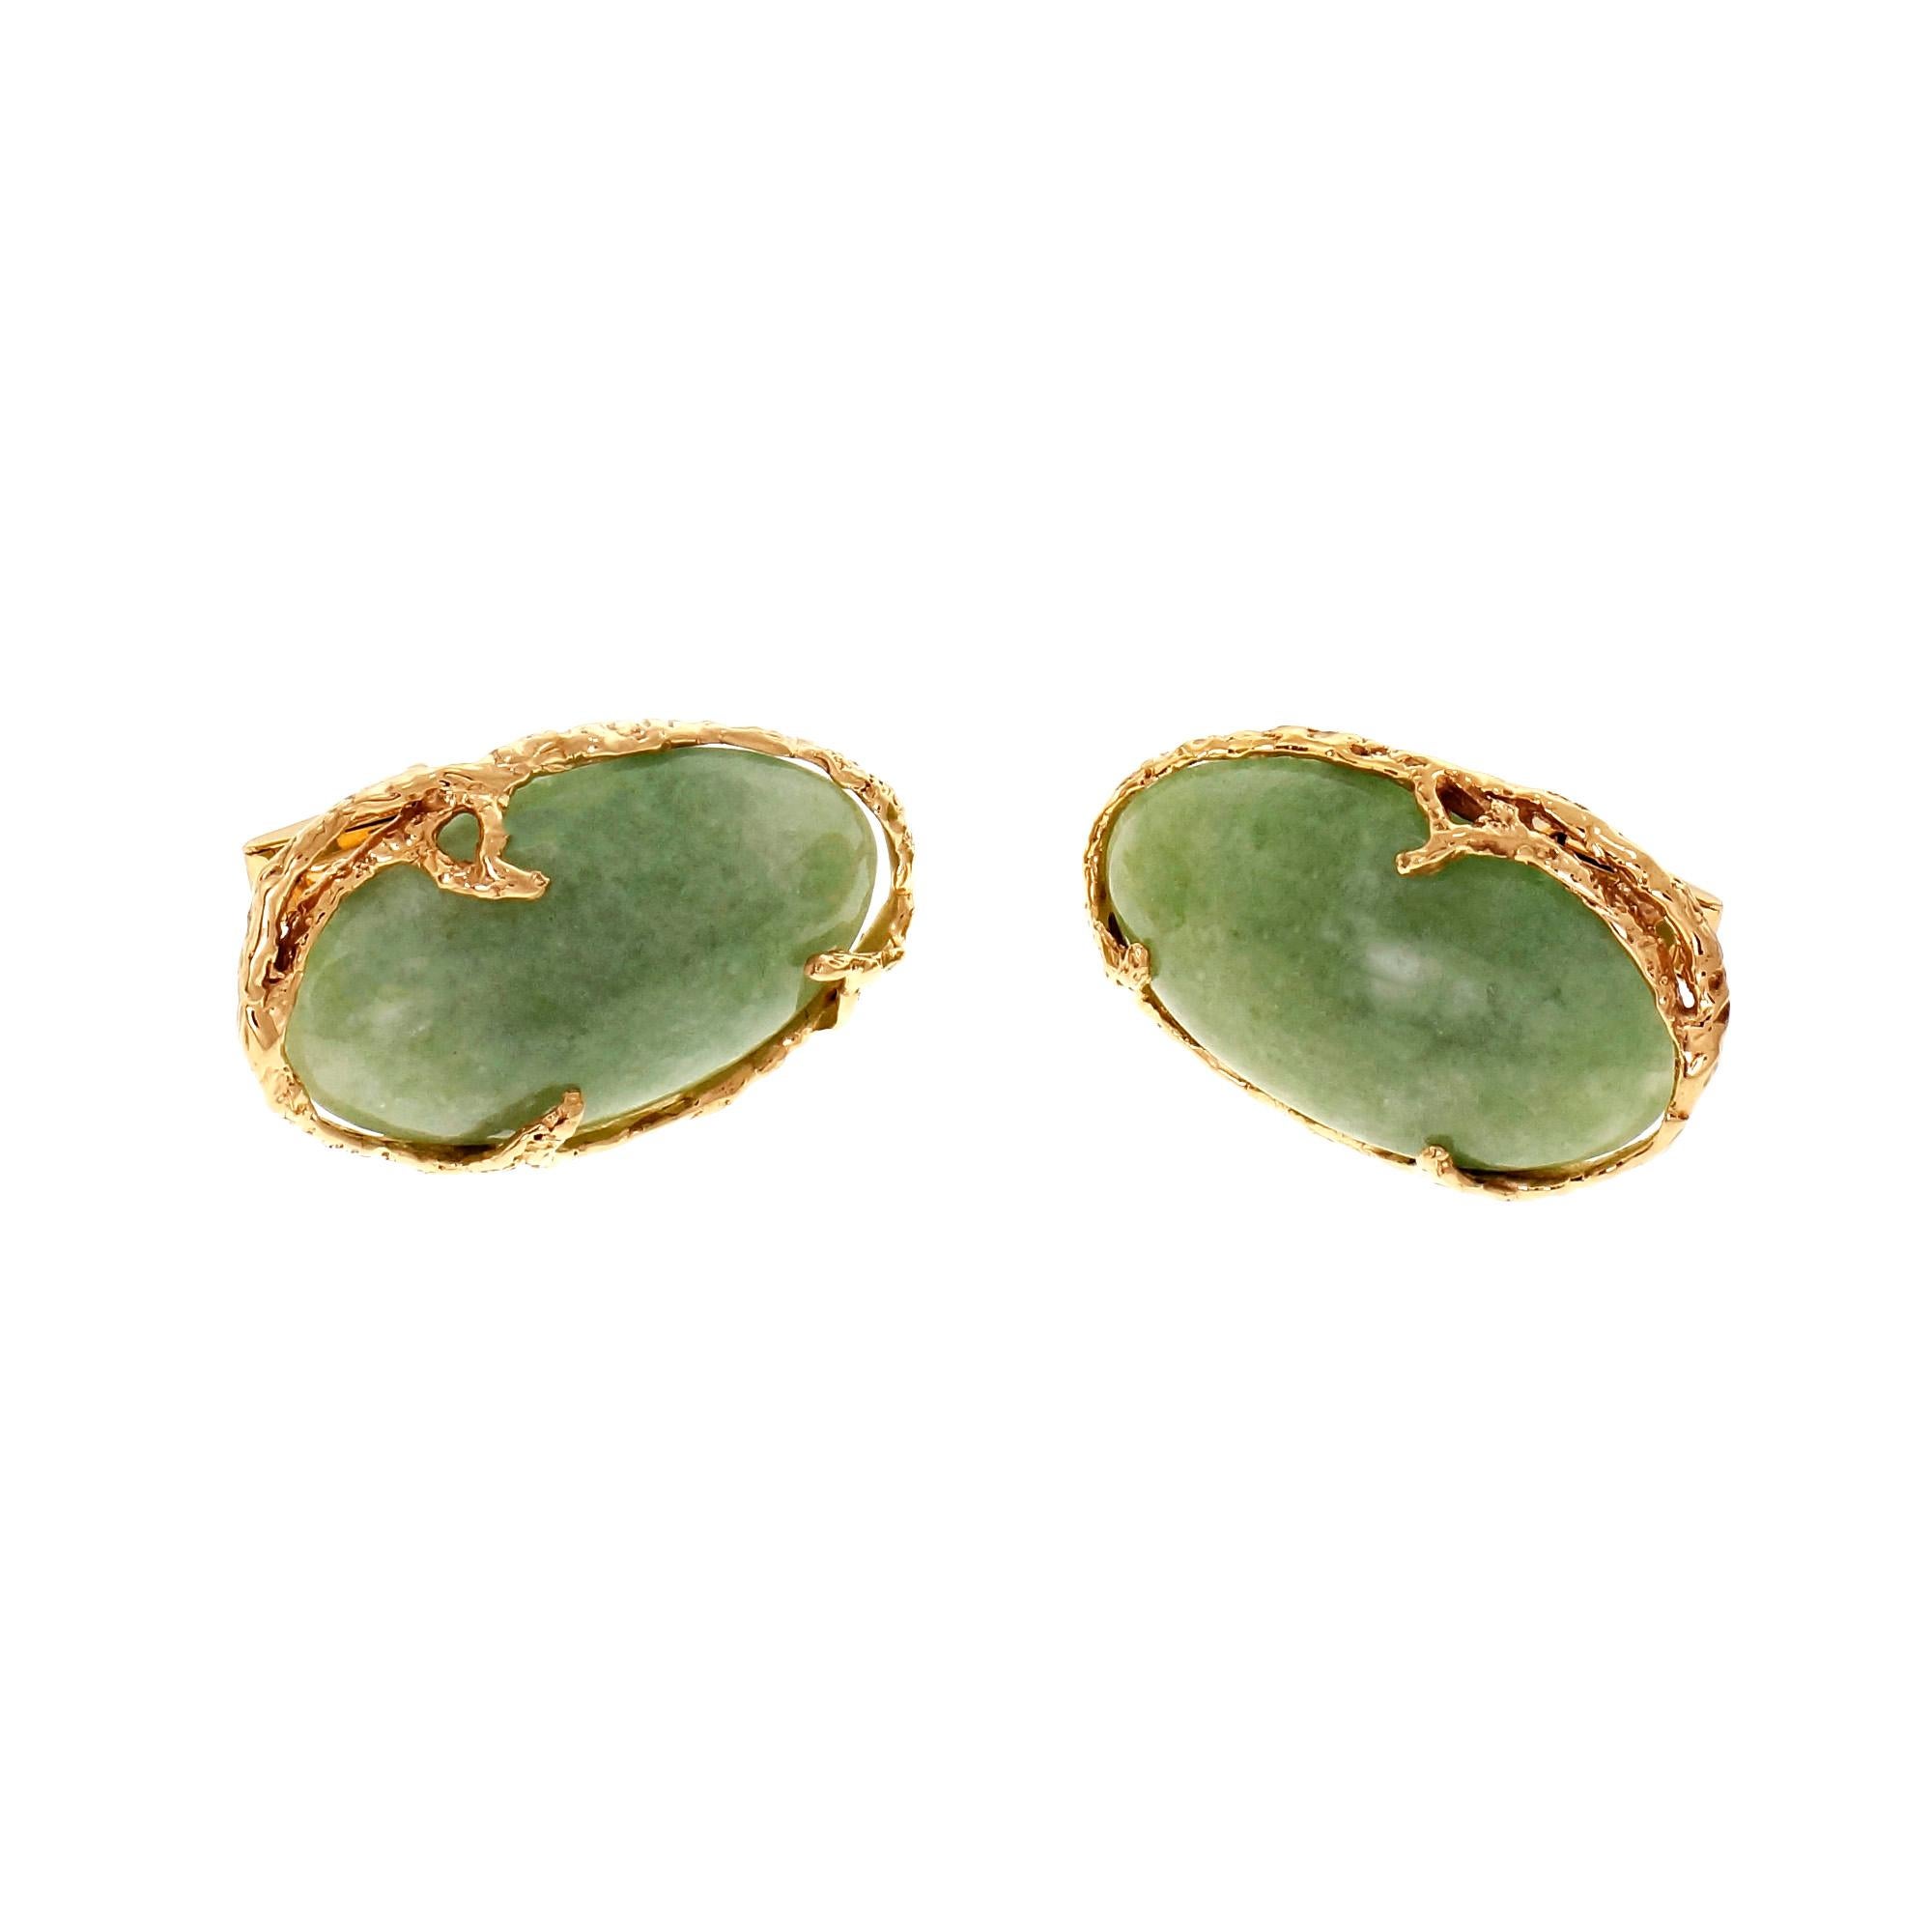 Large oval Jade cufflinks circa 1960, GIA certified Jadeite dyed to improve the color. Referred to as “B” grade.

2 oval green Jadeite Cabochon, 30.95 x 17.9 x 6.4mm, GIA certificate #5192463736
14k yellow gold
Tested and stamped: 14k
13.5 grams
Top